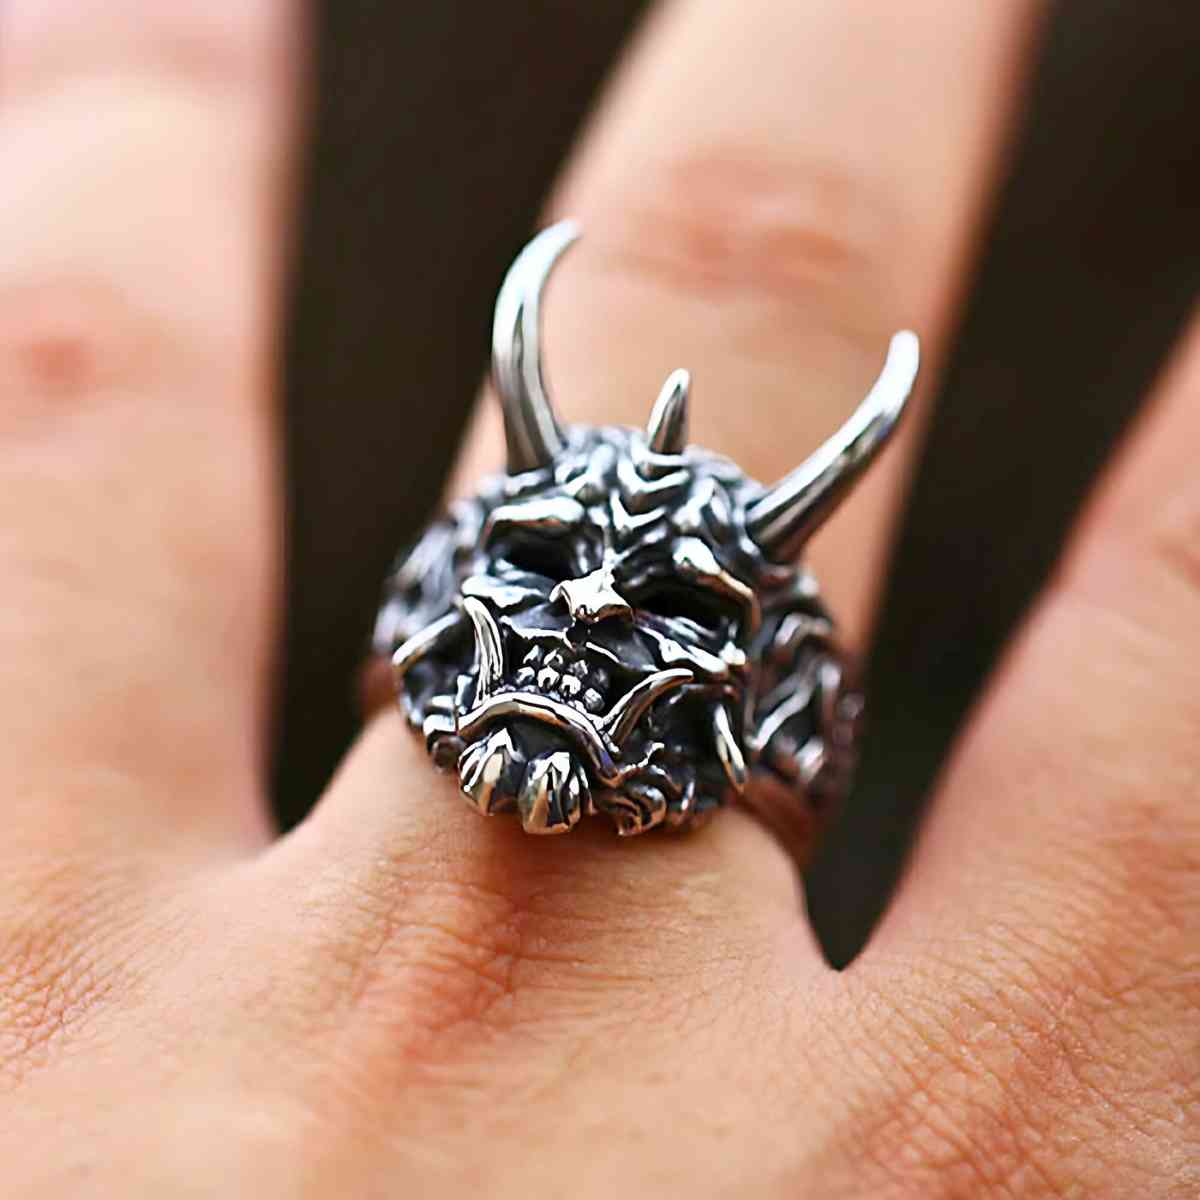 Hannya Ring Stainless Steel Xenos Jewelry